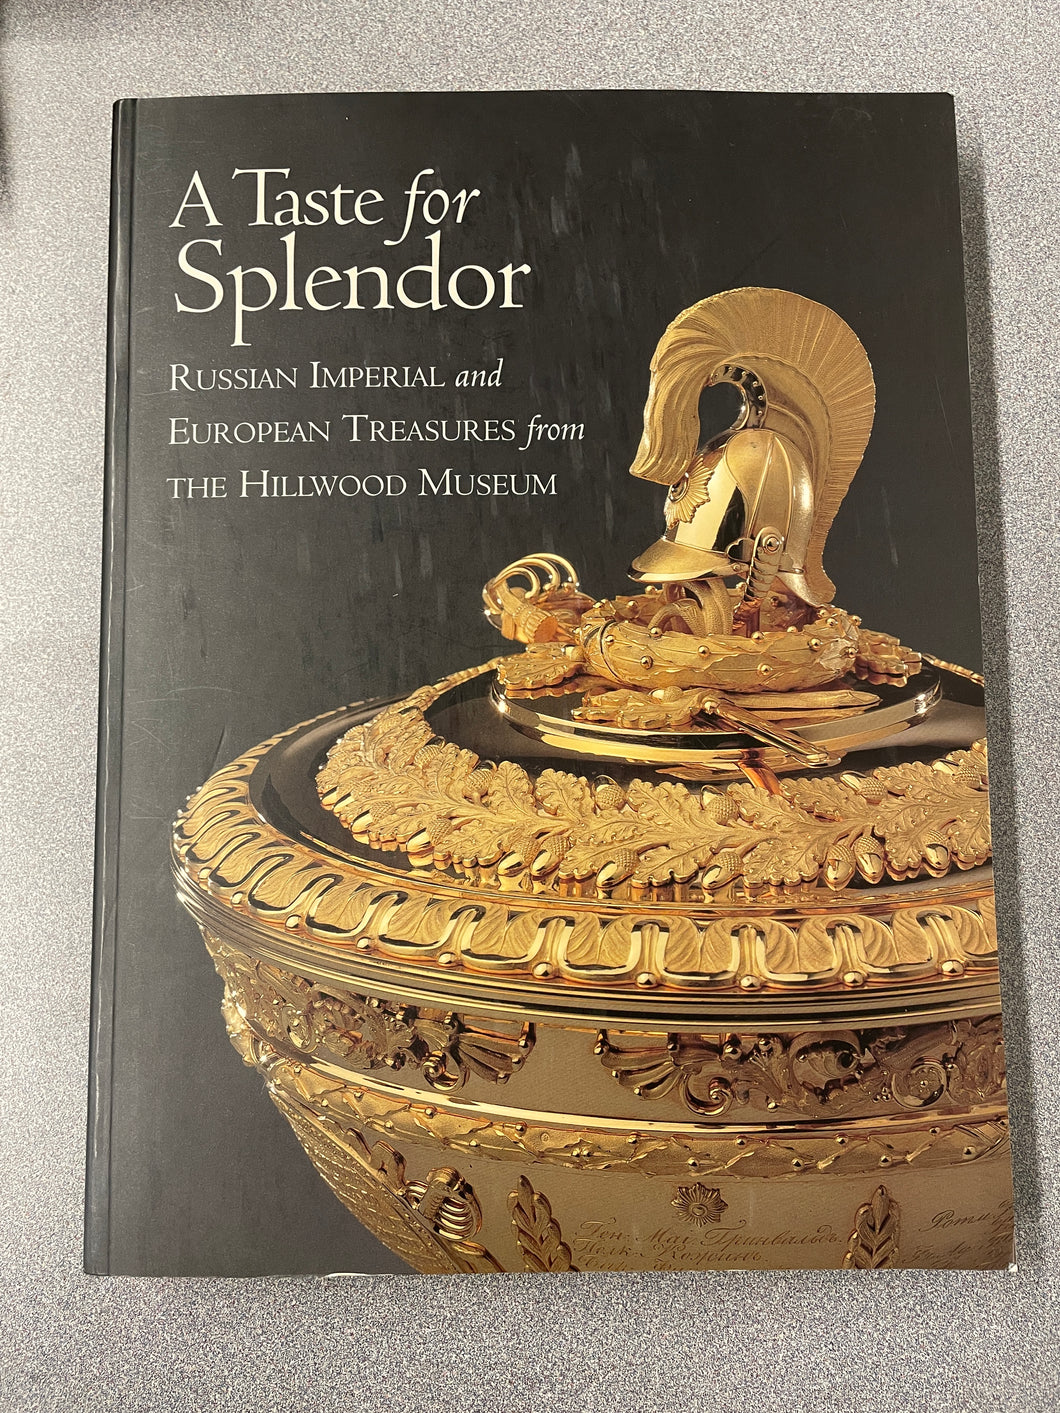 A  A Taste for Splendor: Russian Imperial and European Treasures from the Hillwood Museum, Odom, Anne and Liana Paredes Arend [1998] N 3/24